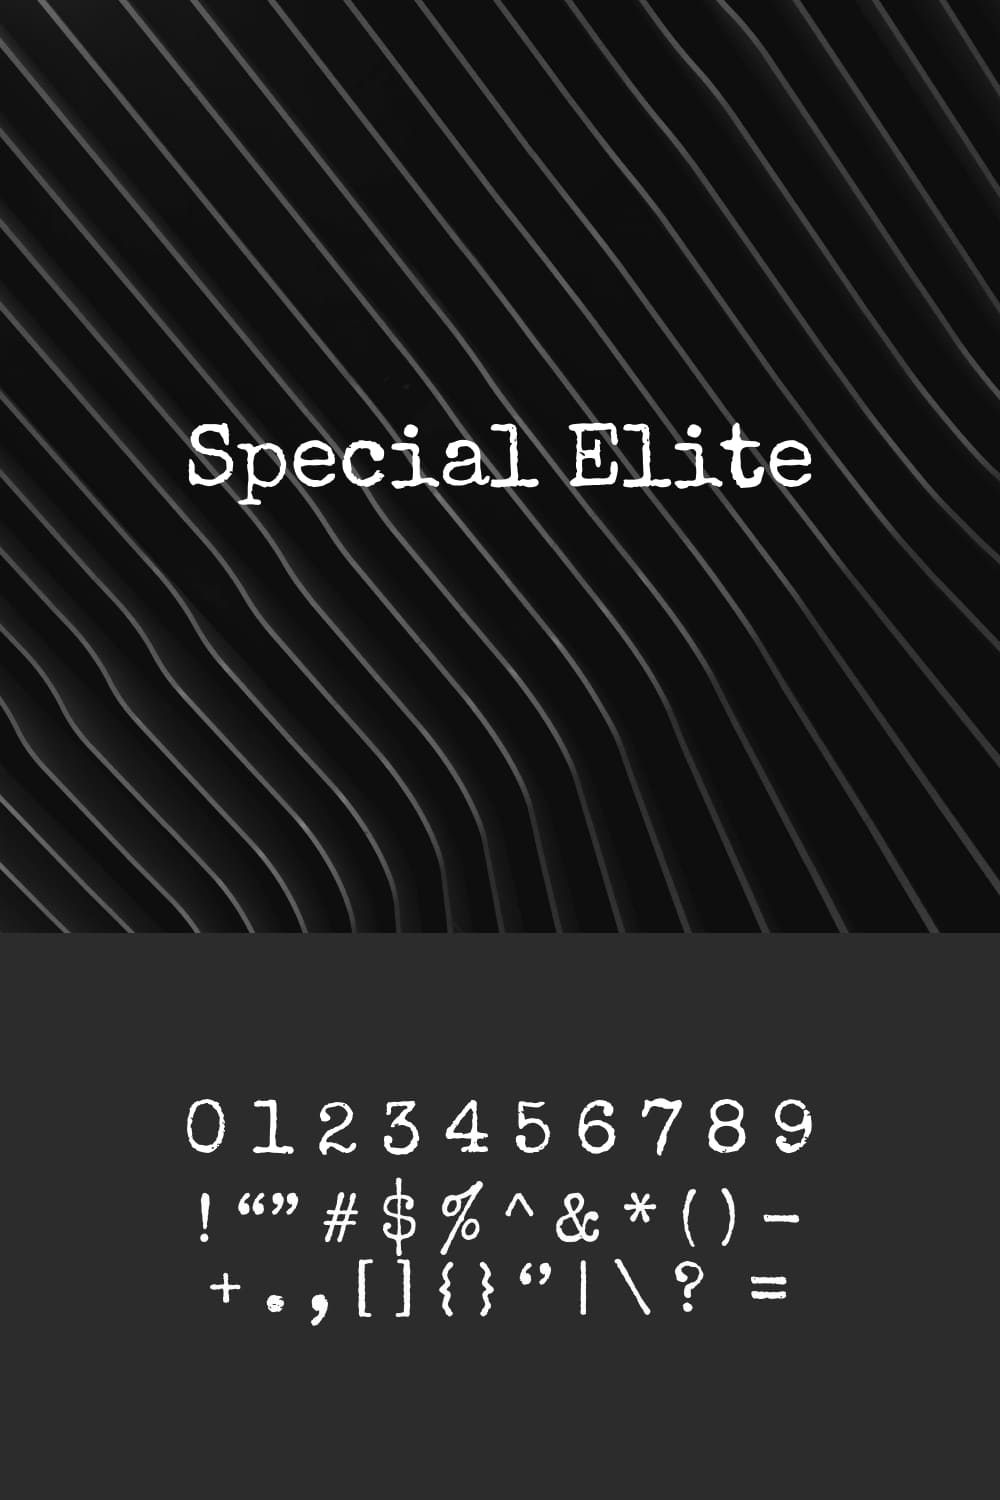 An example of a Special Elite font in white on a black background with stripes.